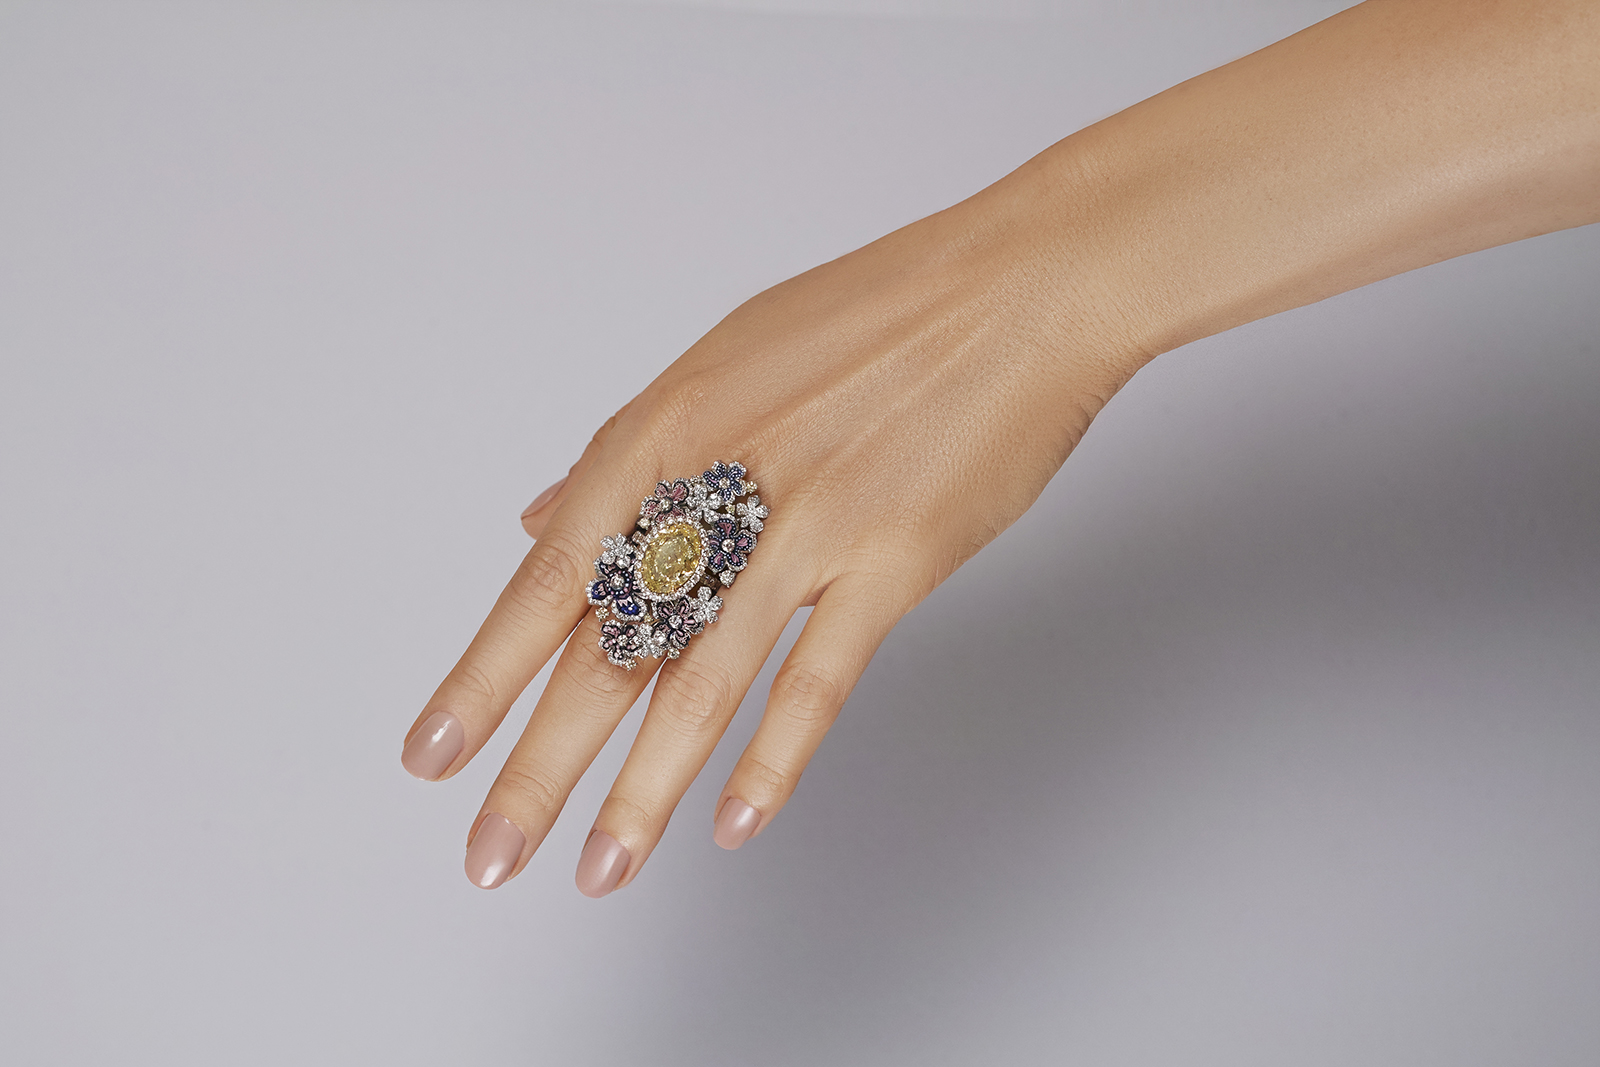 SICIS Secret Garden ring with a 7.66 carat fancy yellow diamond centre surrounded by micro-mosaics